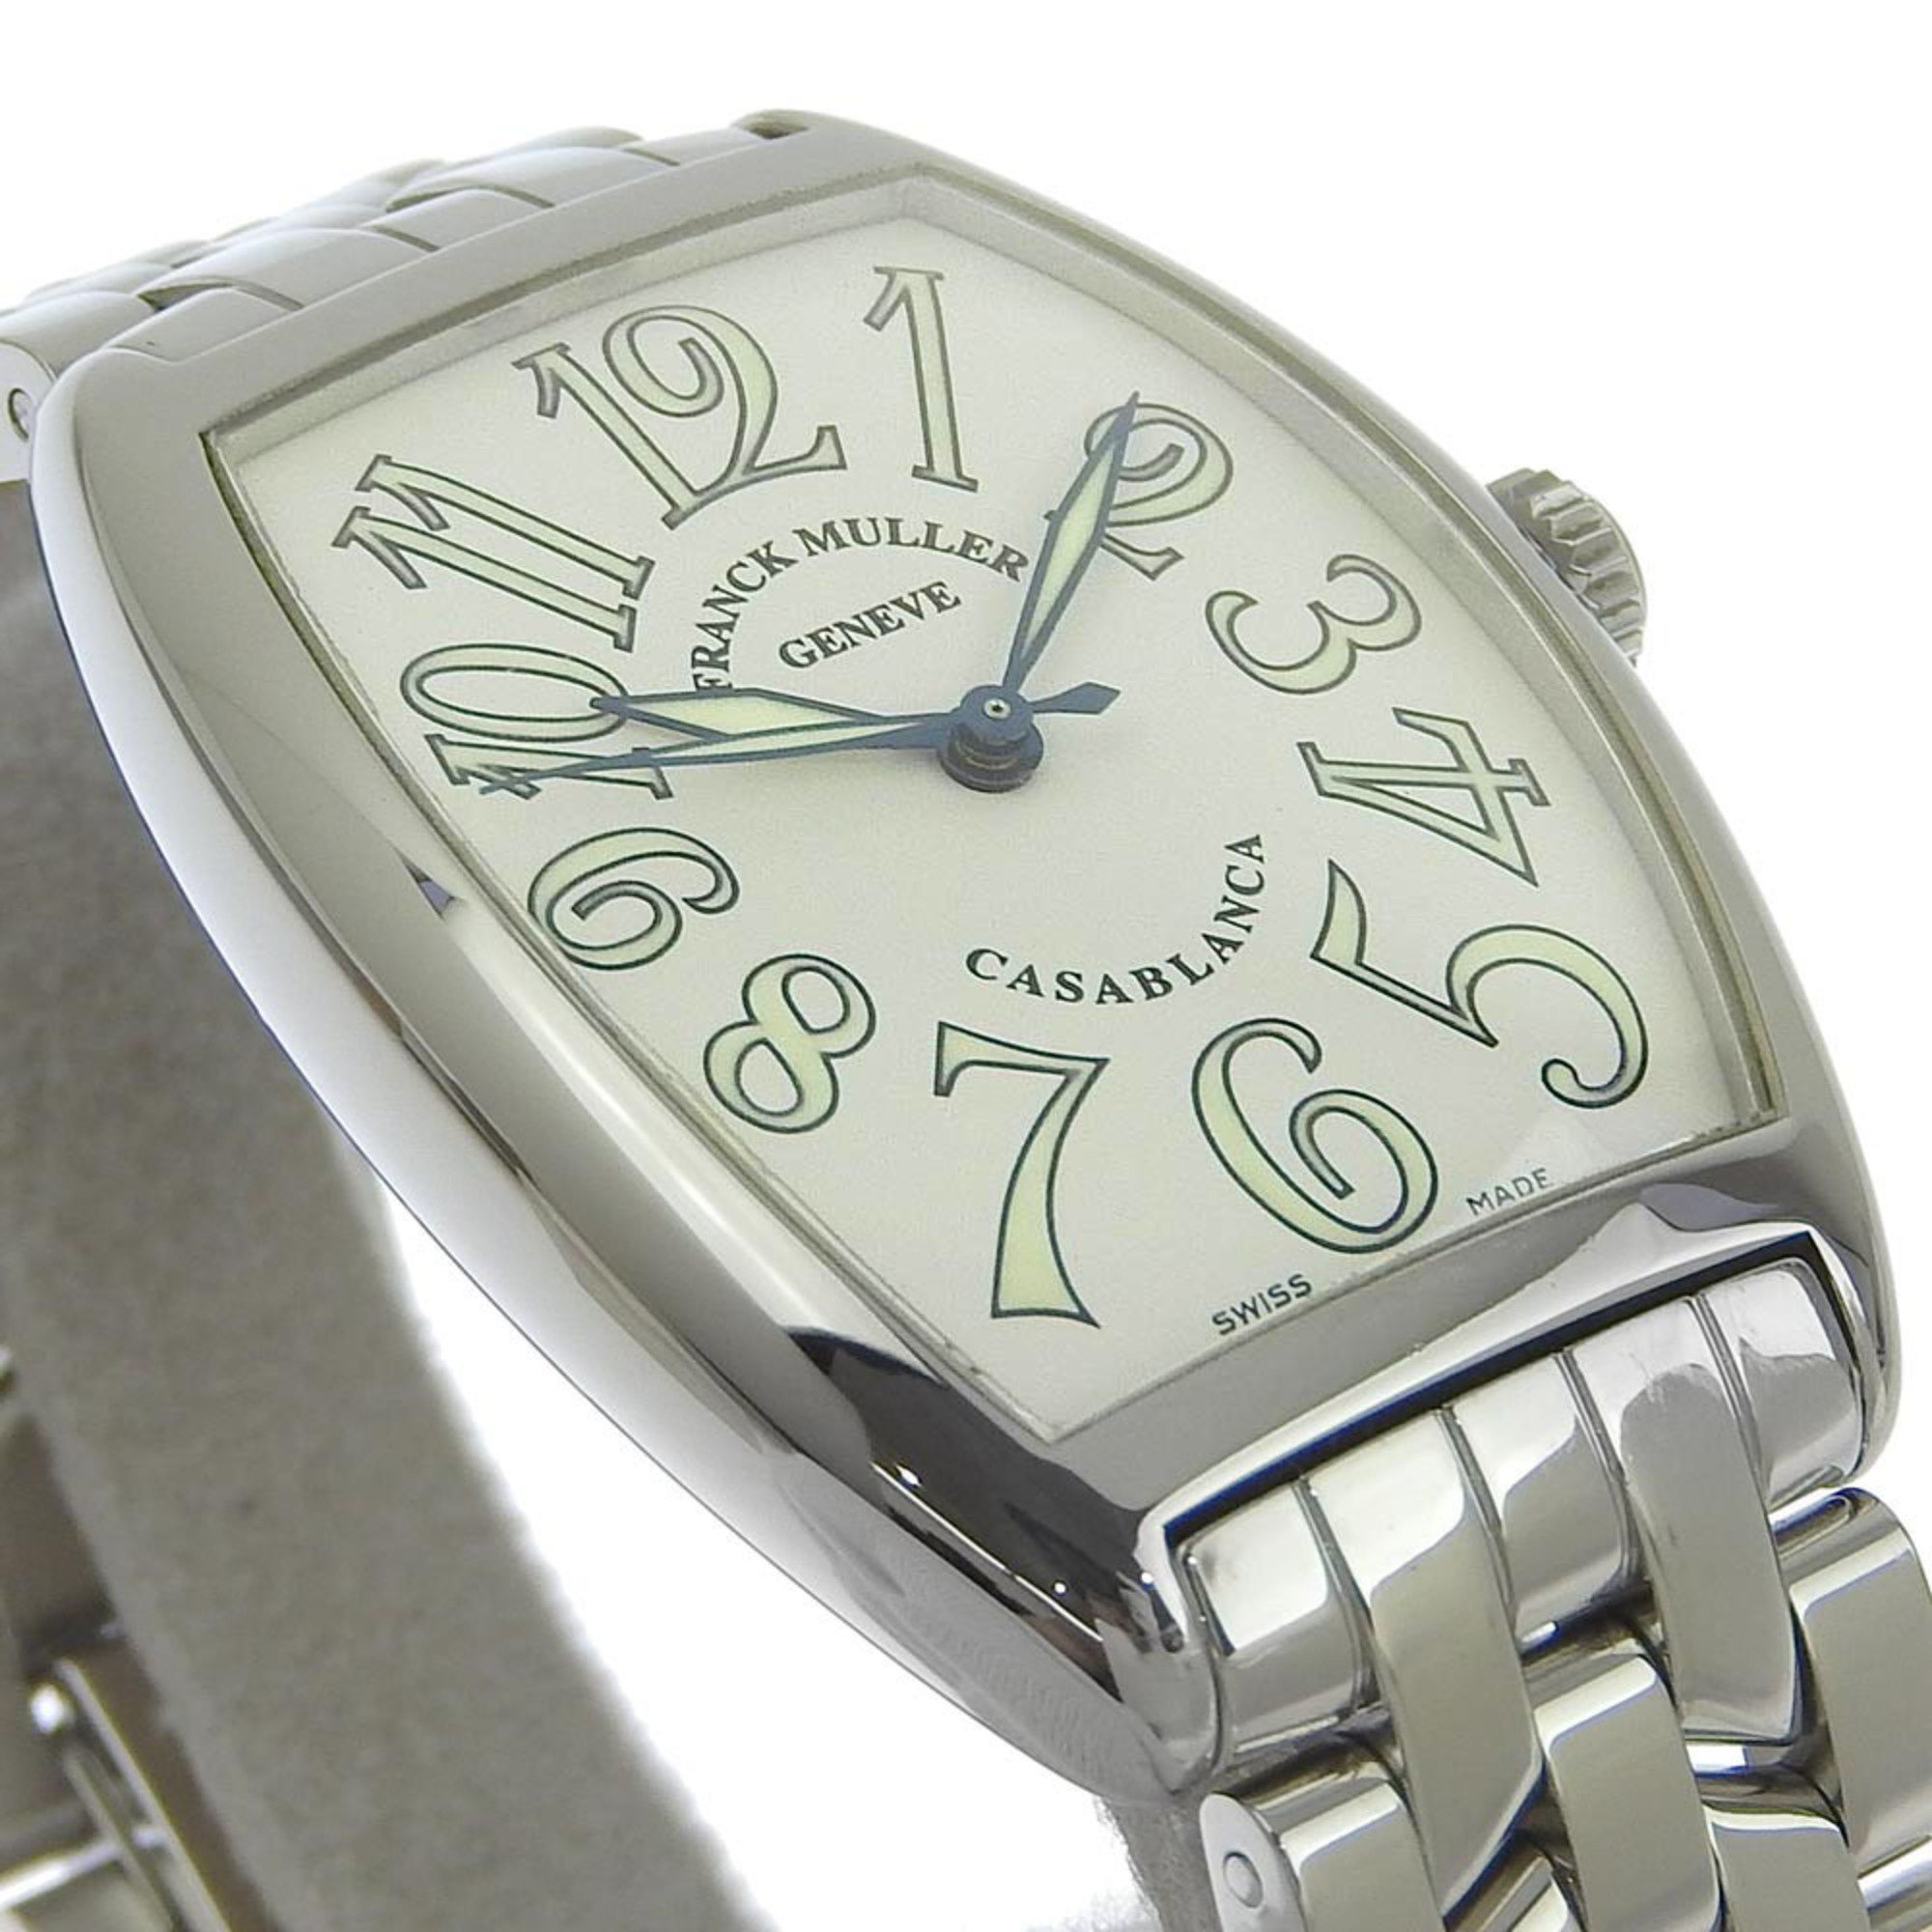 FRANCK MULLER Franck Muller Casablanca watch 2852 stainless steel silver automatic winding men's white dial